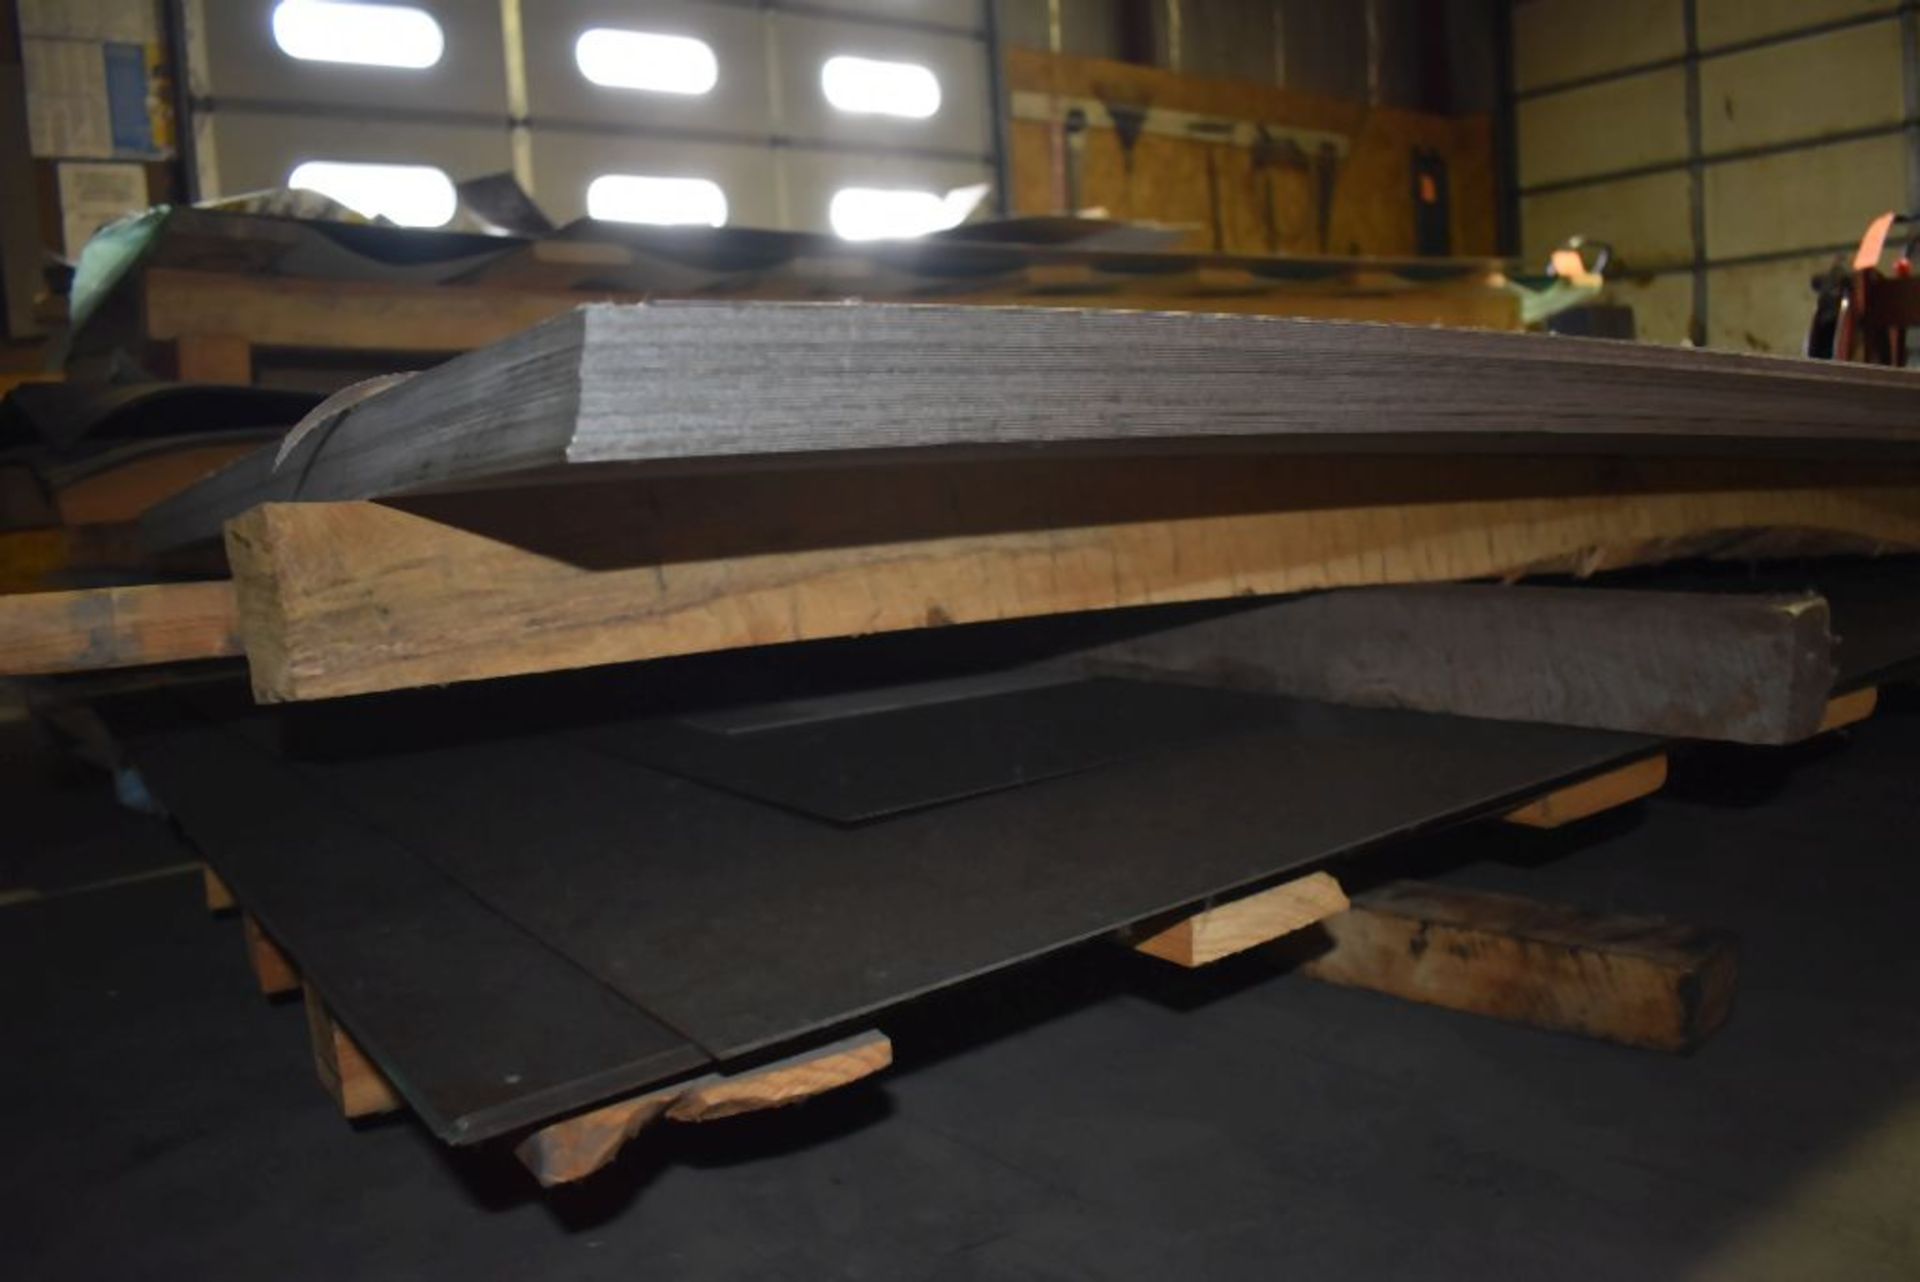 STACK OF 18 GAUGE 48" x 10' COLD ROLLED DQ STEEL AND MISC. SHEET STOCK ON LOWER STACK - Image 2 of 2